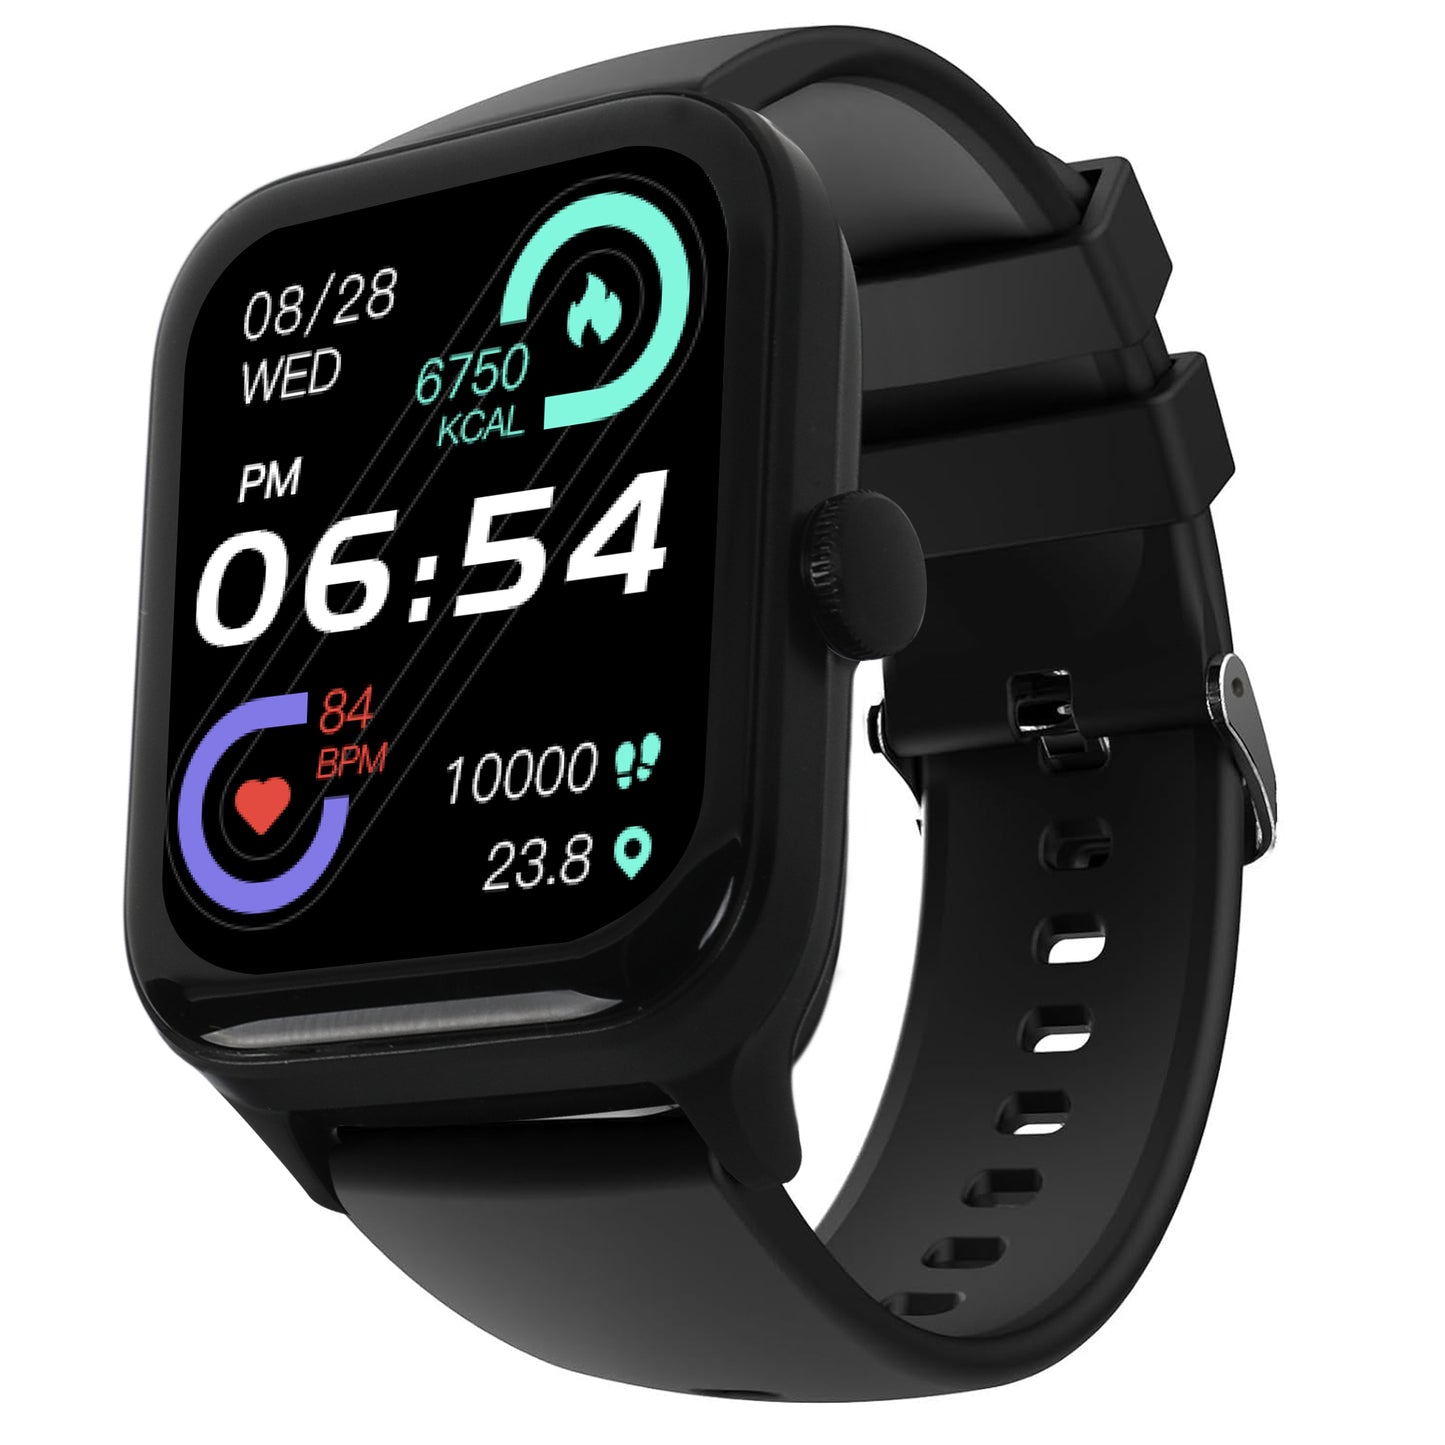 Salora uWear Javelin 2.01” (5.1 cm) HD Curved IPS Display, Bluetooth Calling Smartwatch, 200+ Watch Faces,100+ Sports Modes,  Heart & SpO2 Monitoring,Sleep Monitor, AI Voice Assistance, Water Resistant Smart watch, SSW-004